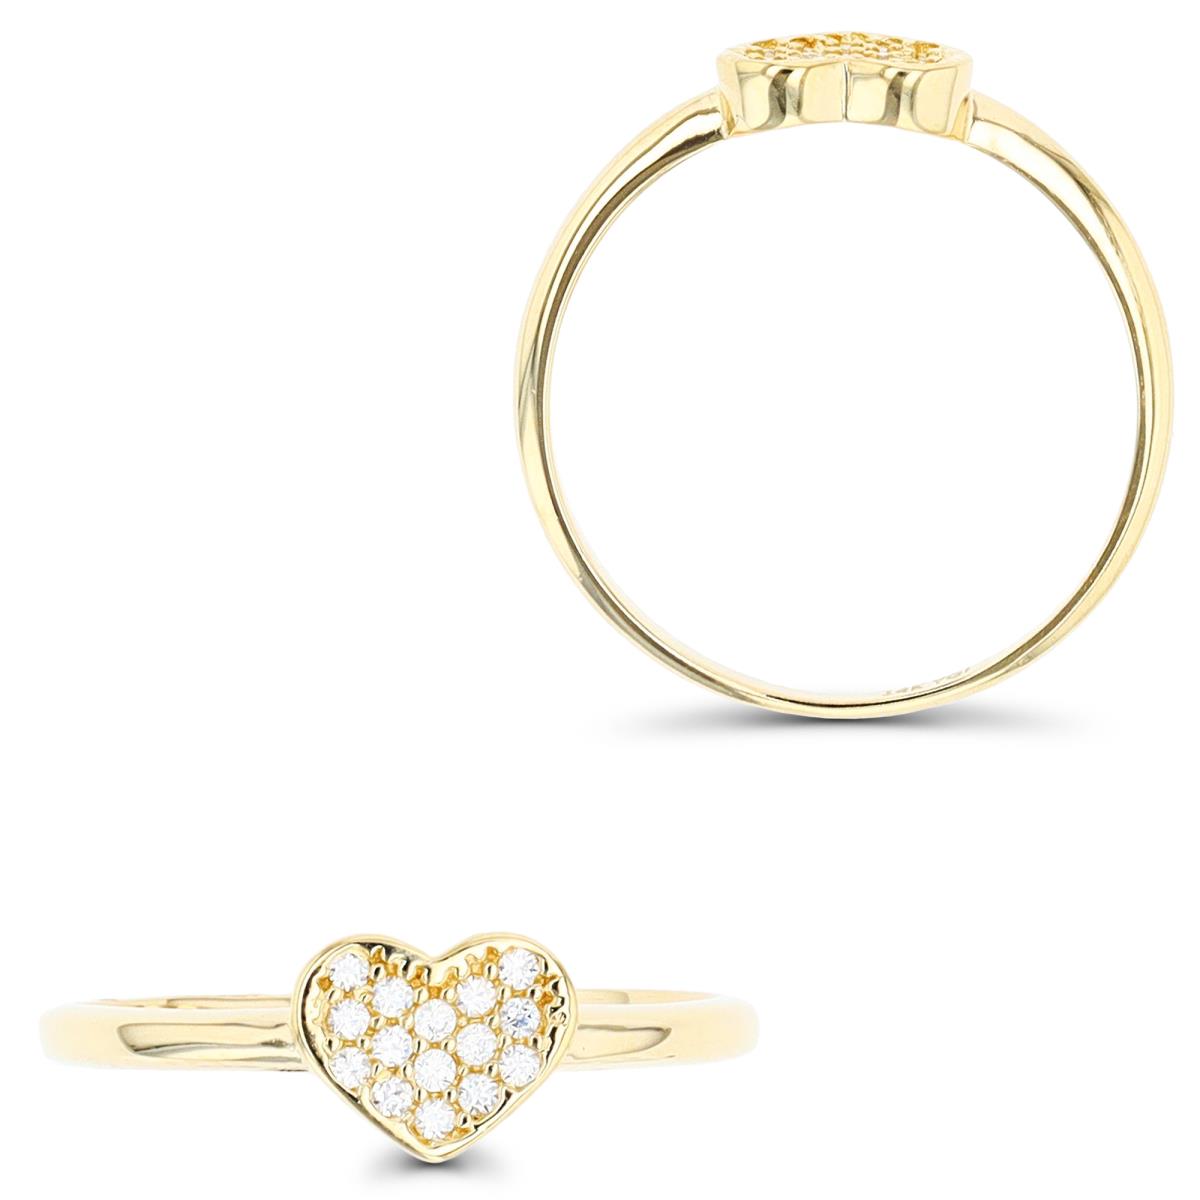 10K Yellow Gold Pave Heart Fashion Ring